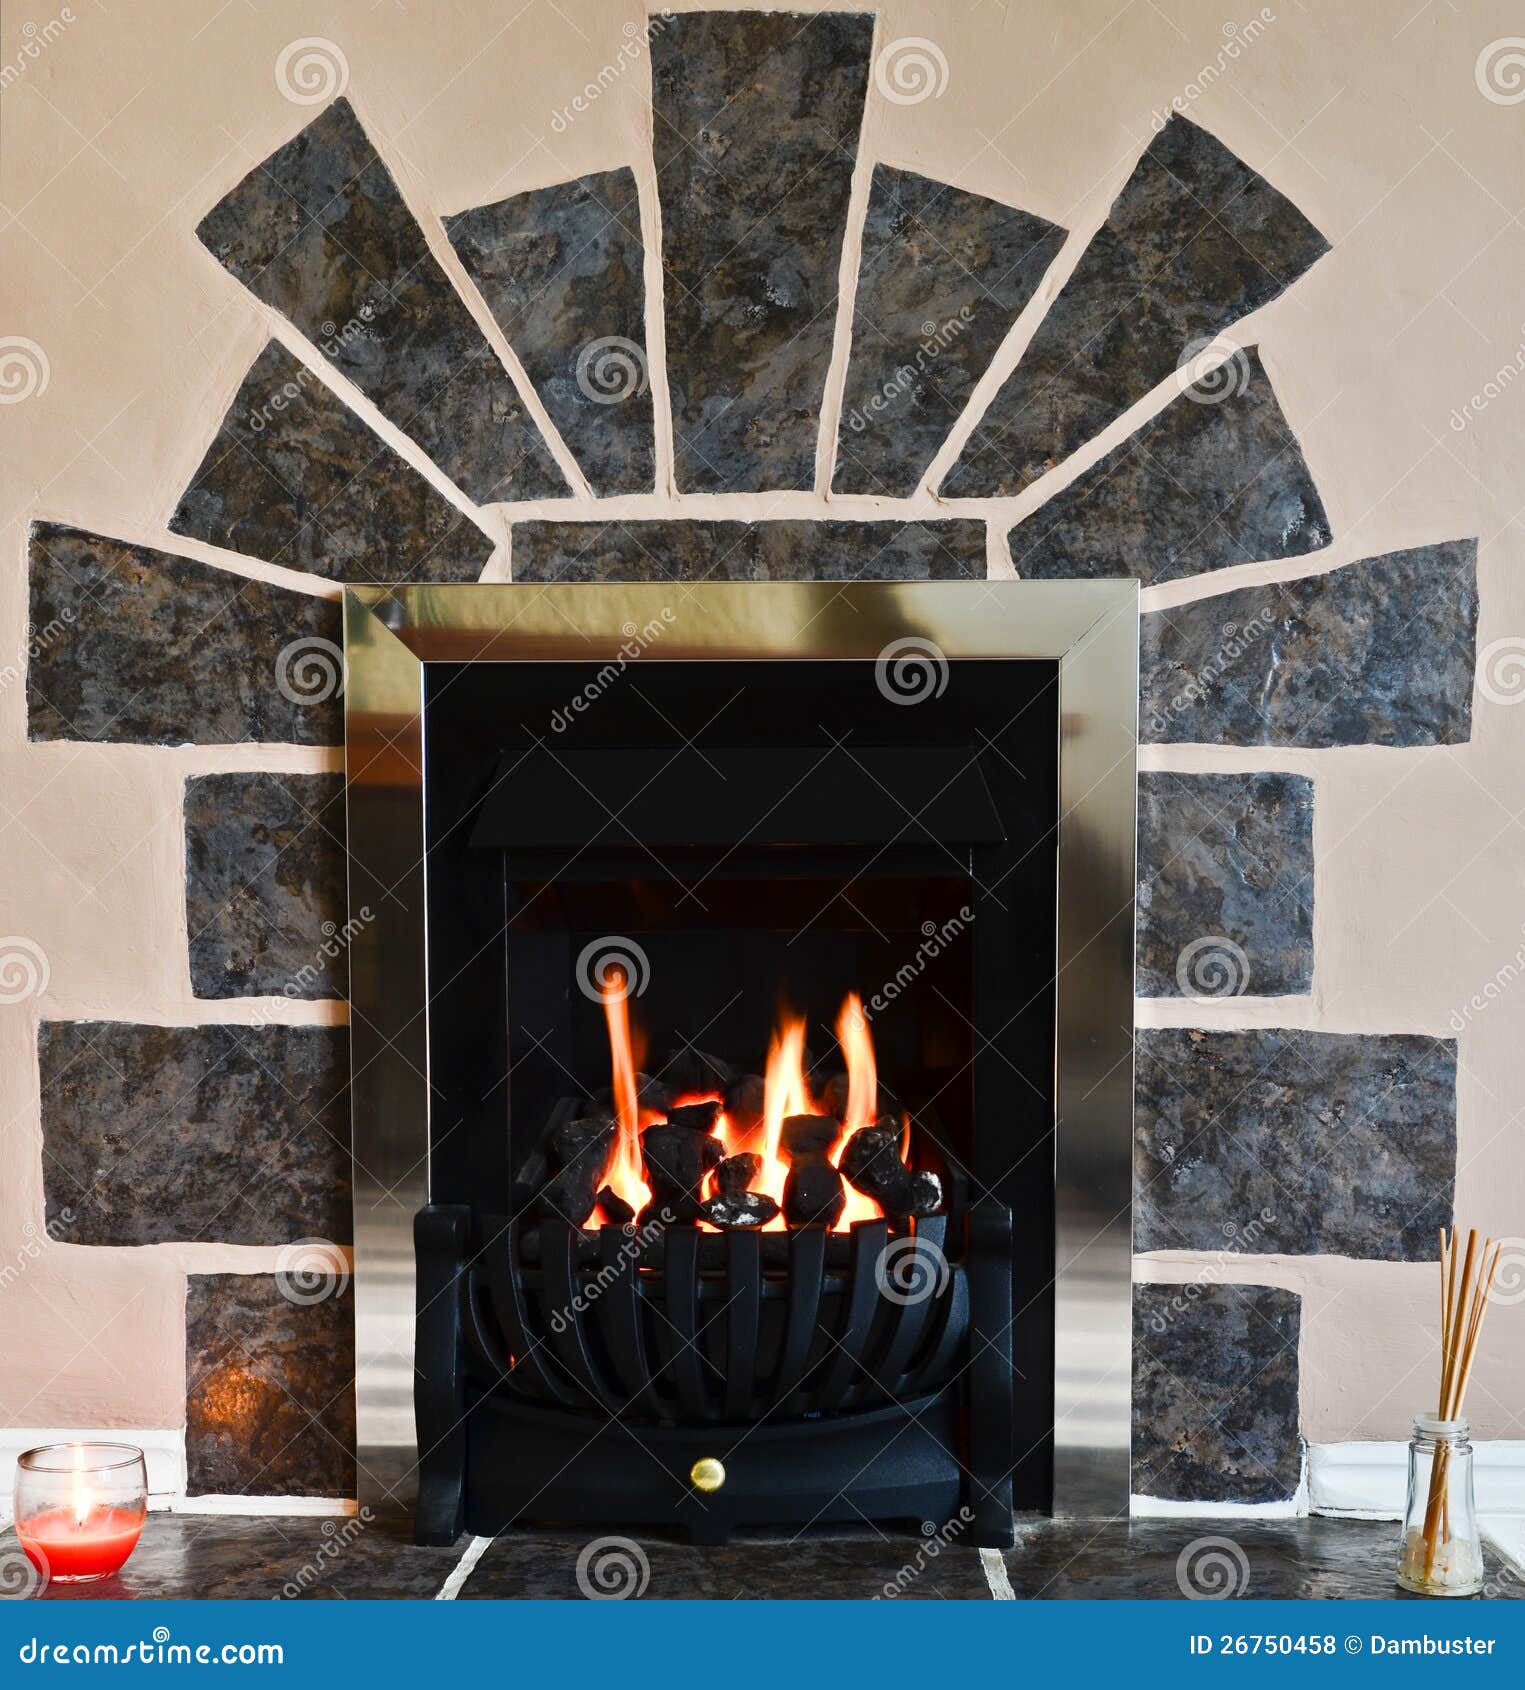 gas fireplace and surround